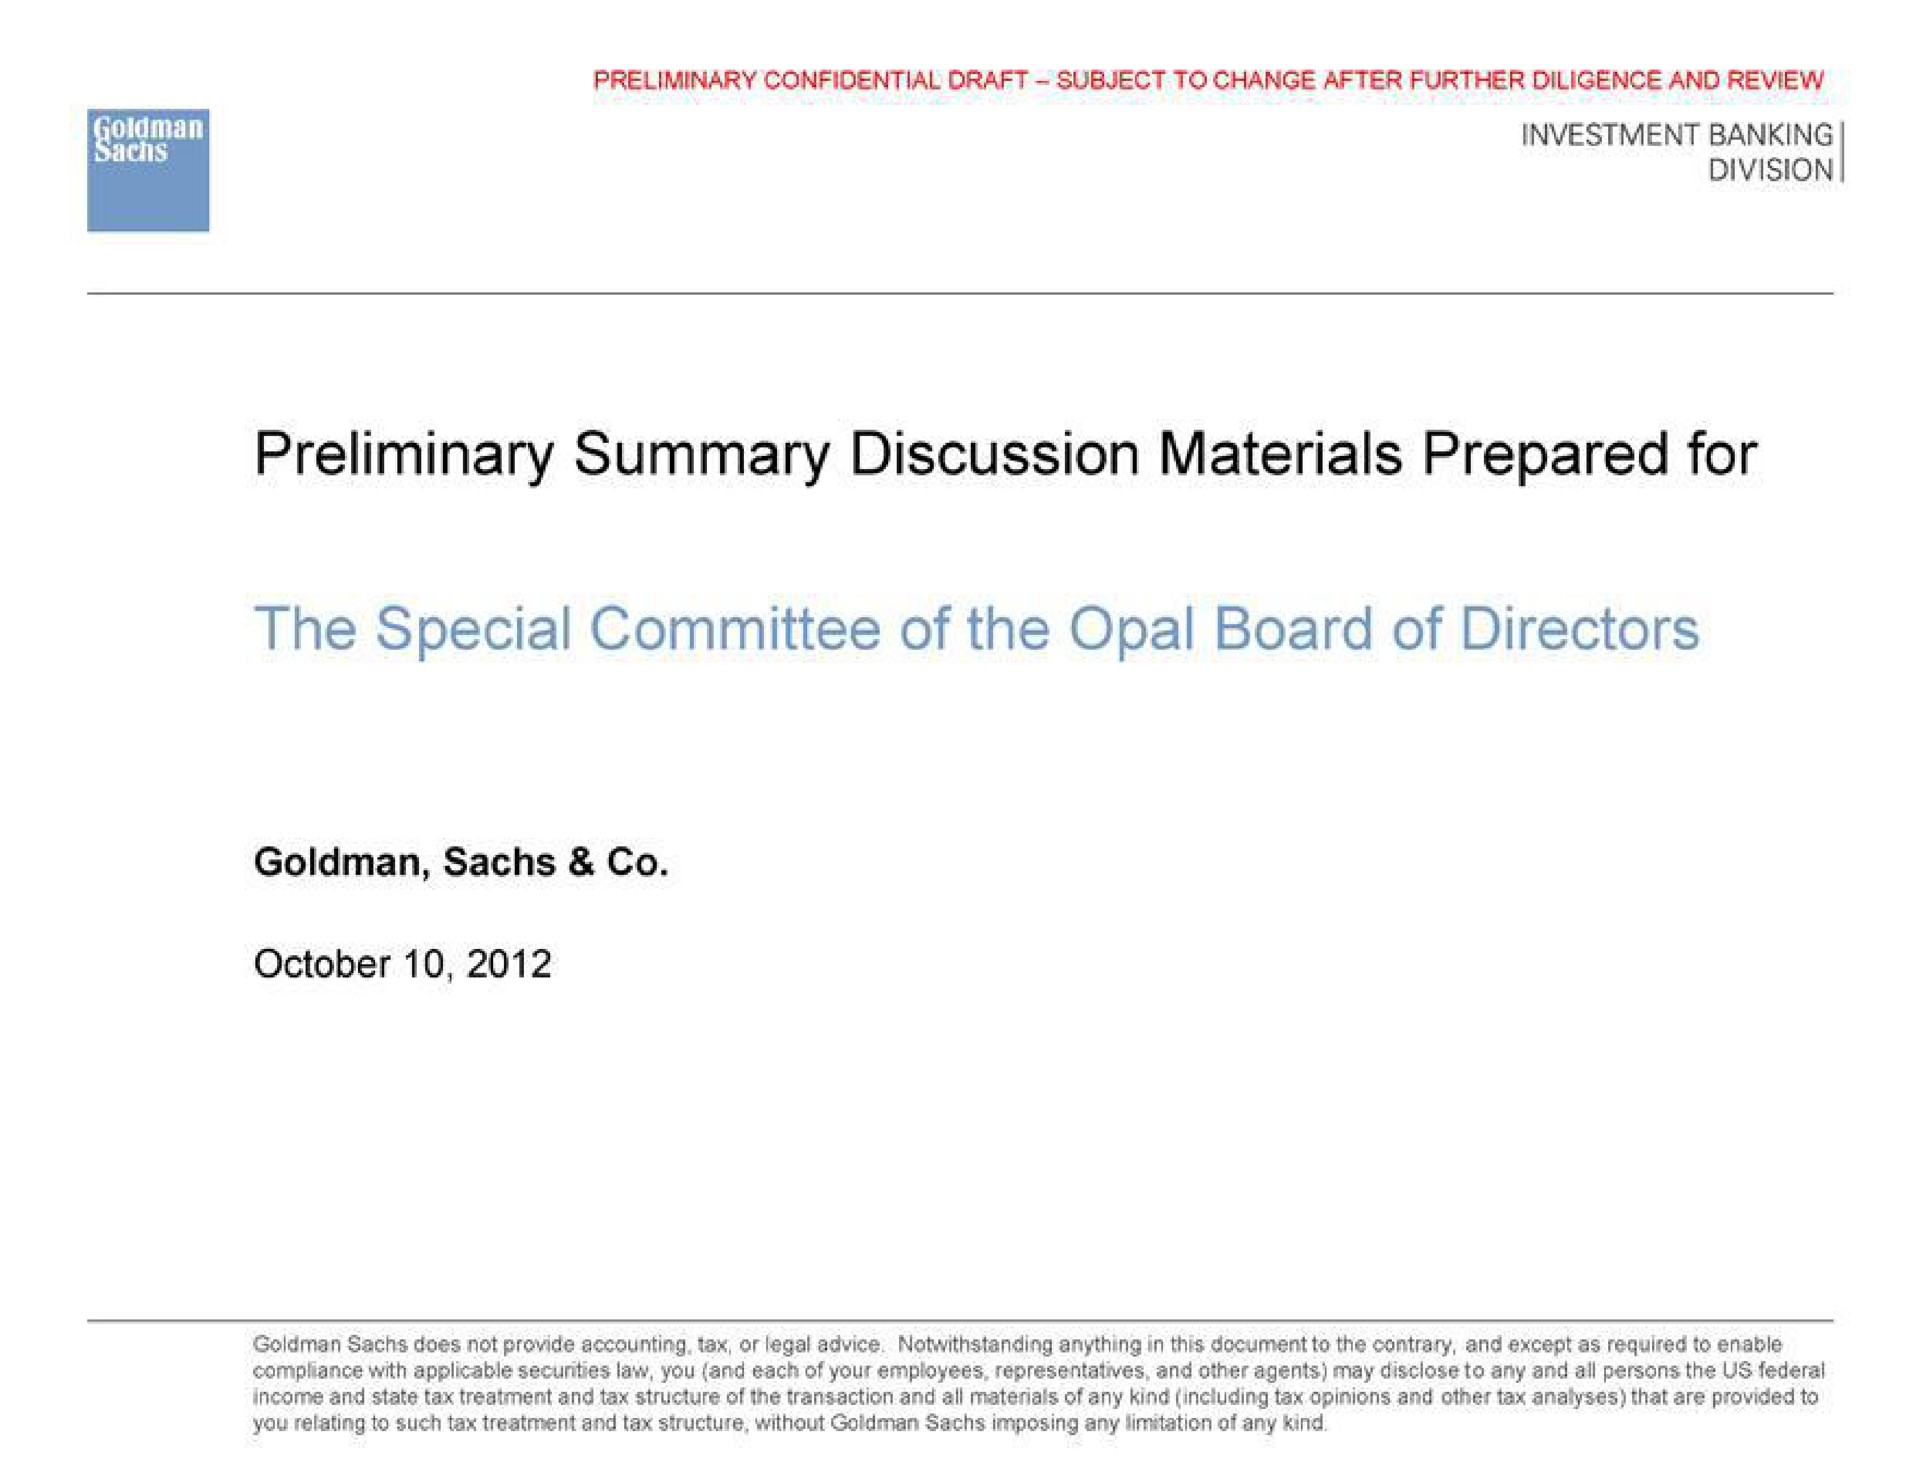 preliminary summary discussion materials prepared for the special committee of the opal board of directors | Goldman Sachs